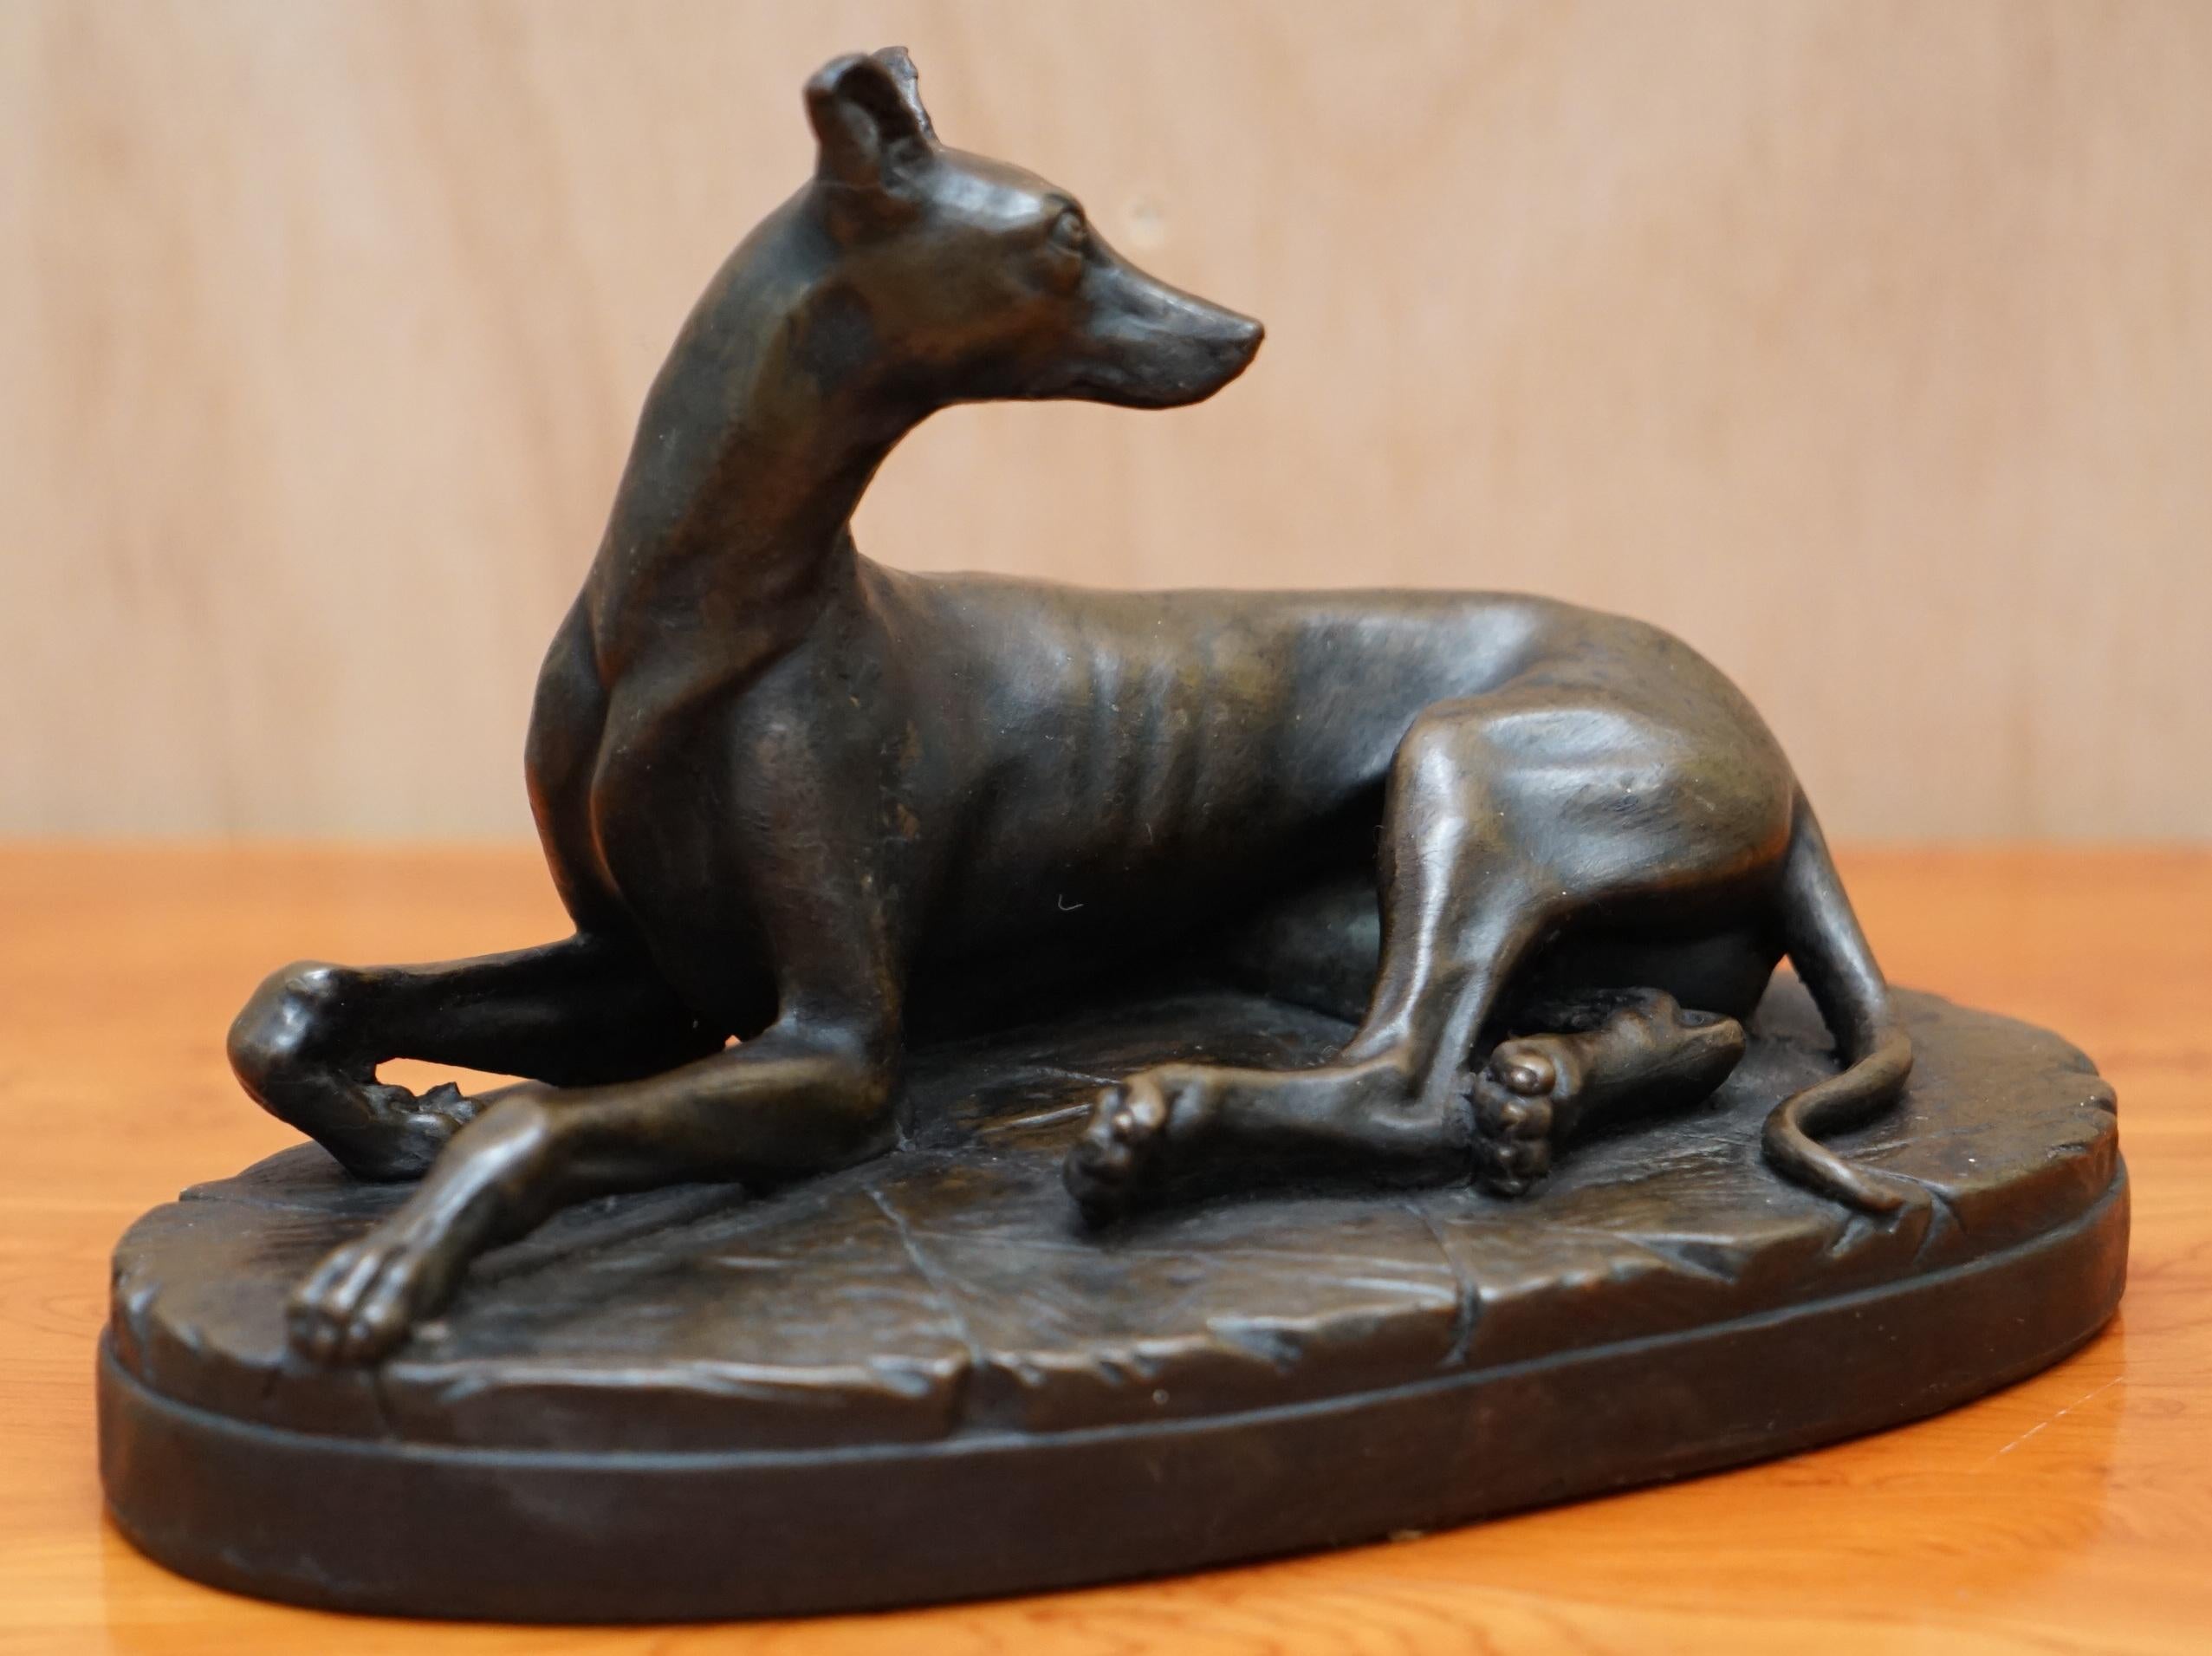 We are delighted to this lovely solid bronze statue of a Whippet dog laying down

A good looking and well made piece, very decorative, I have two of these the other is of a Mastiff which is listed under my other items

We have cleaned waxed and